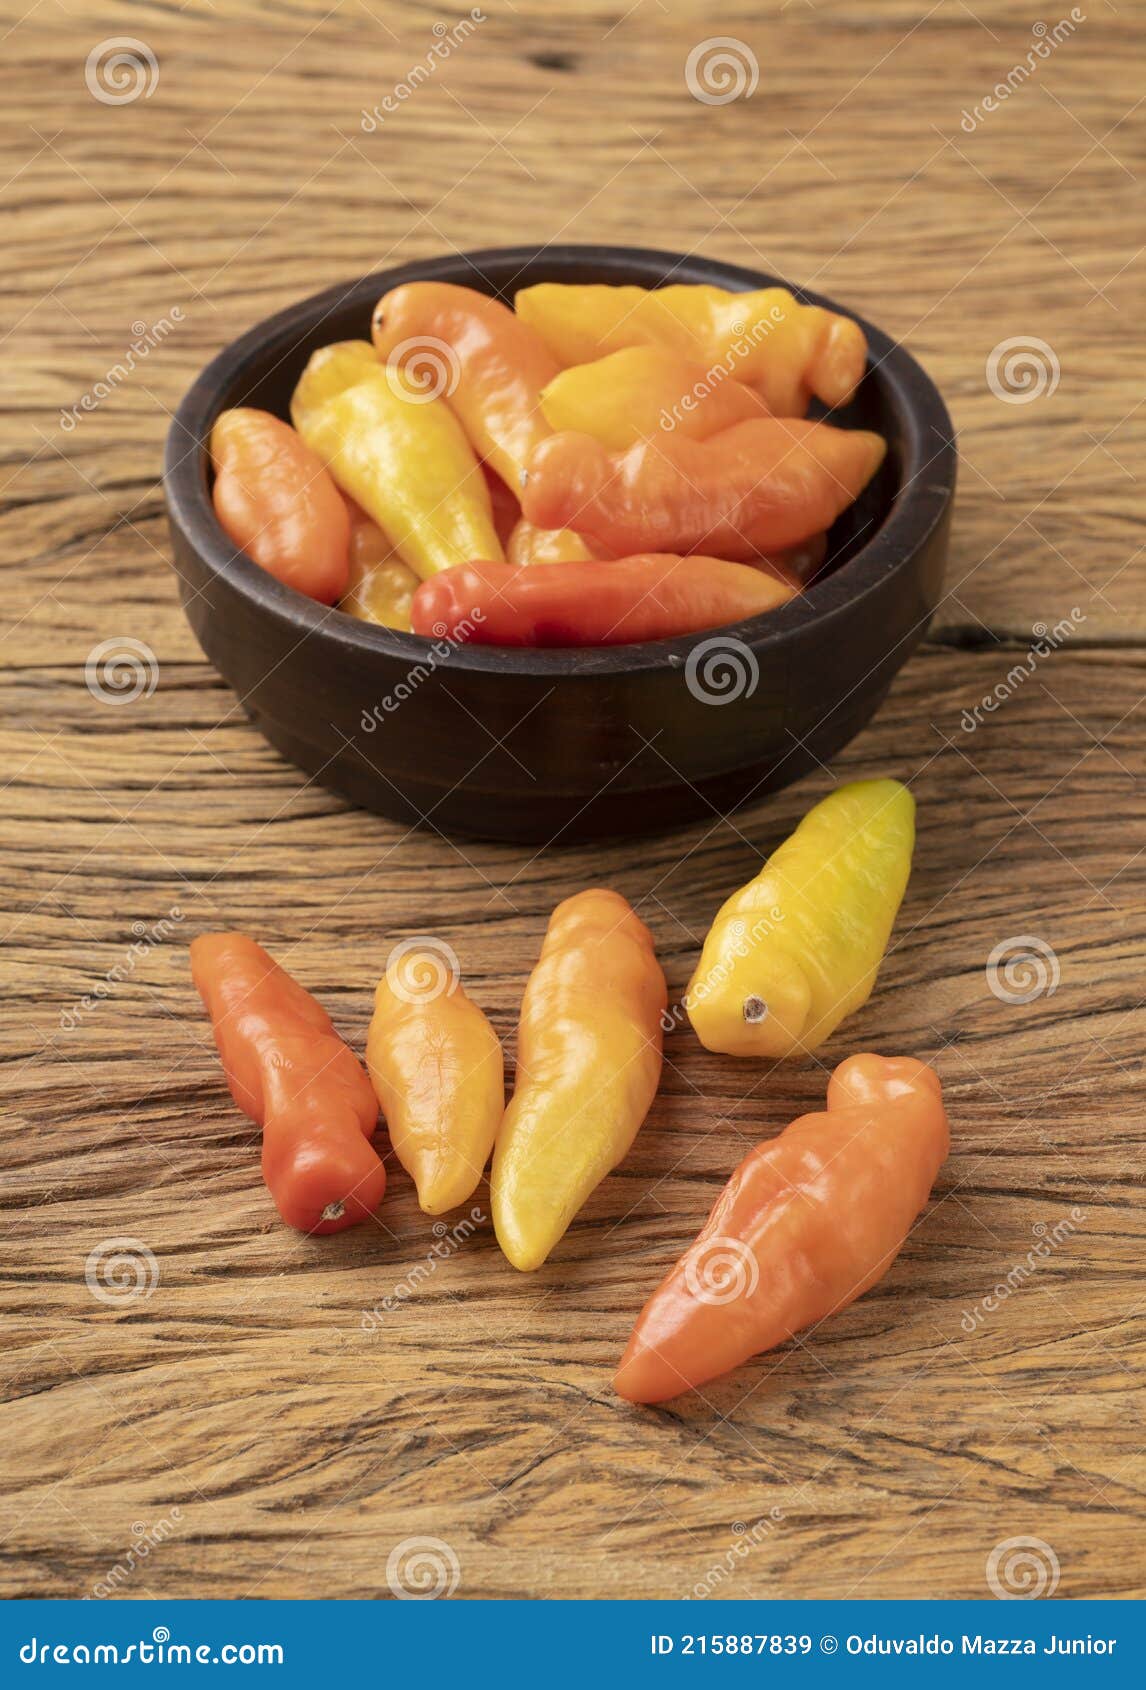 orange cheiro scent/smell pepper on a bowl over wooden table